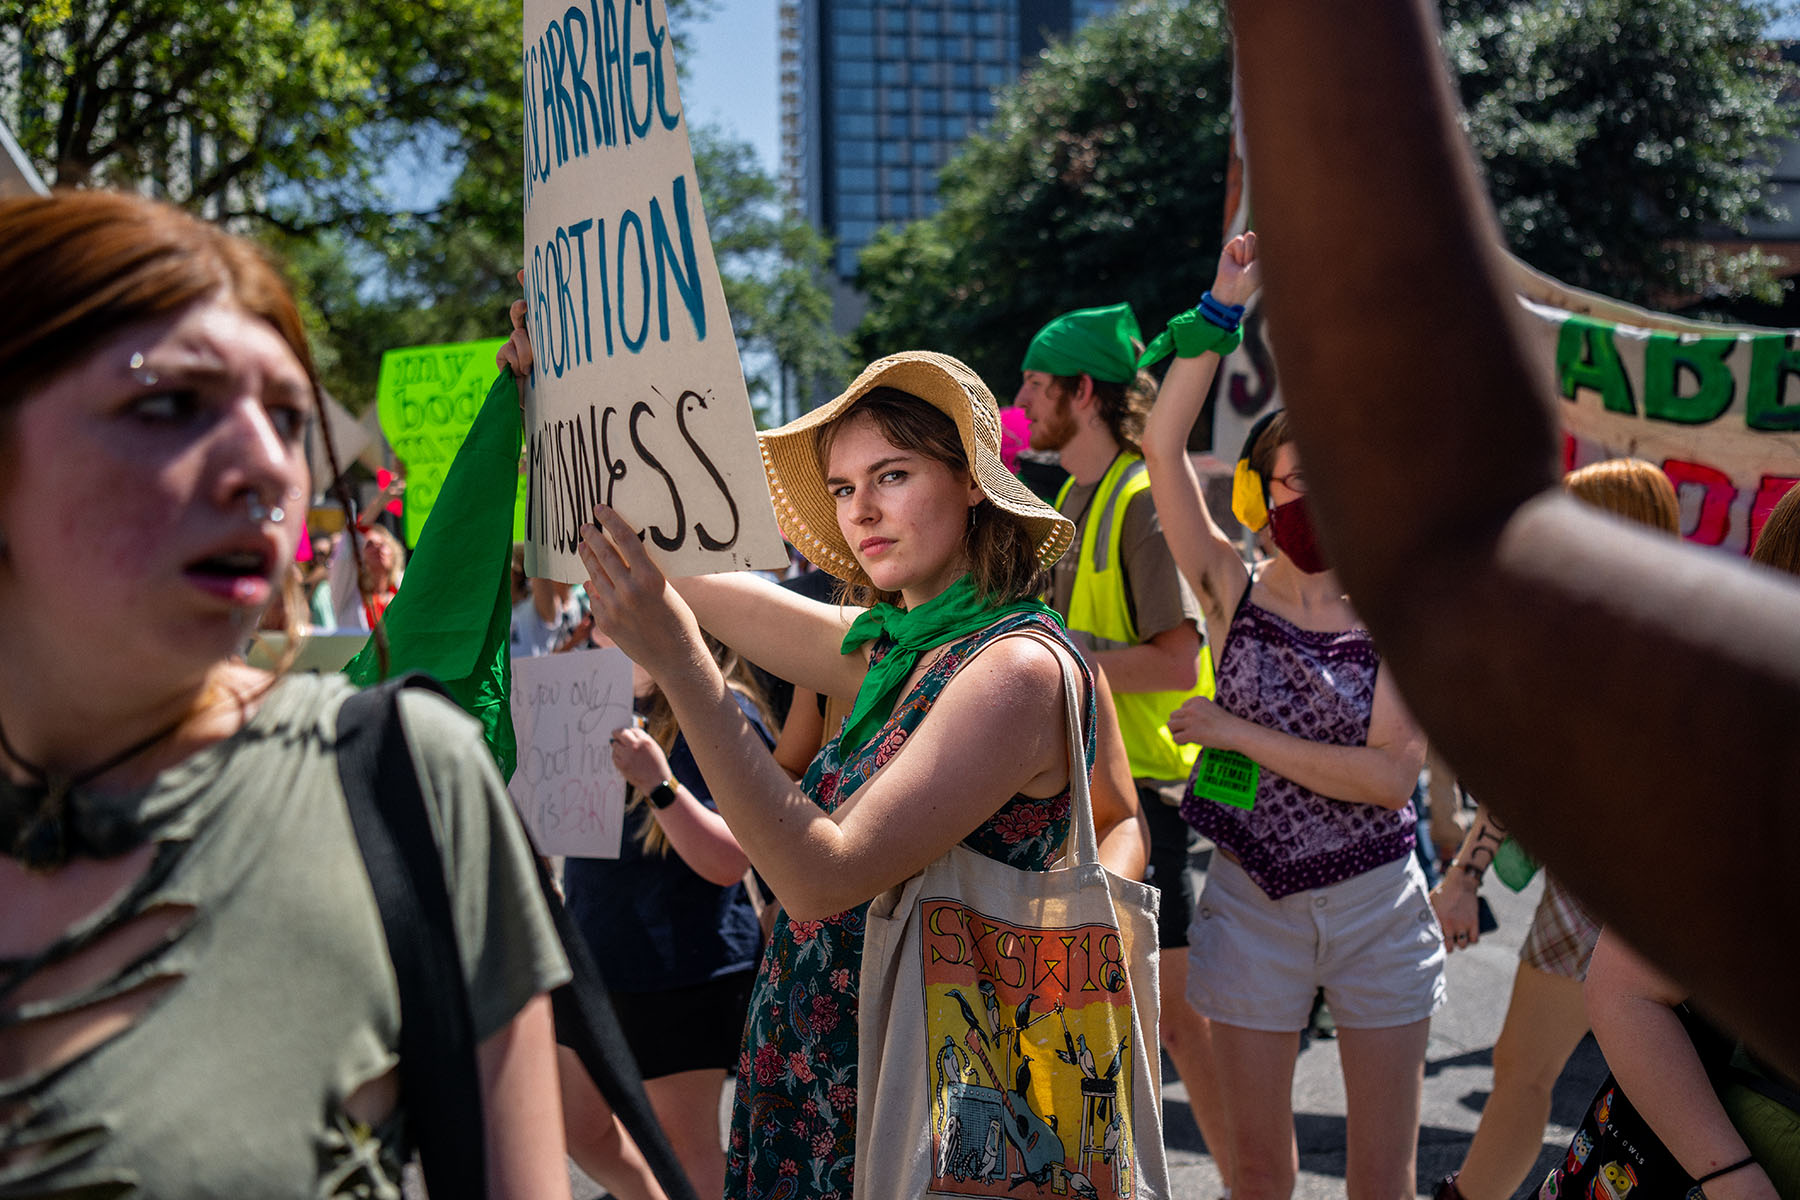 A woman holding a sign looks straight into the camera as abortion rights activists and supporters march outside of the Austin Convention Center, in May 2022.